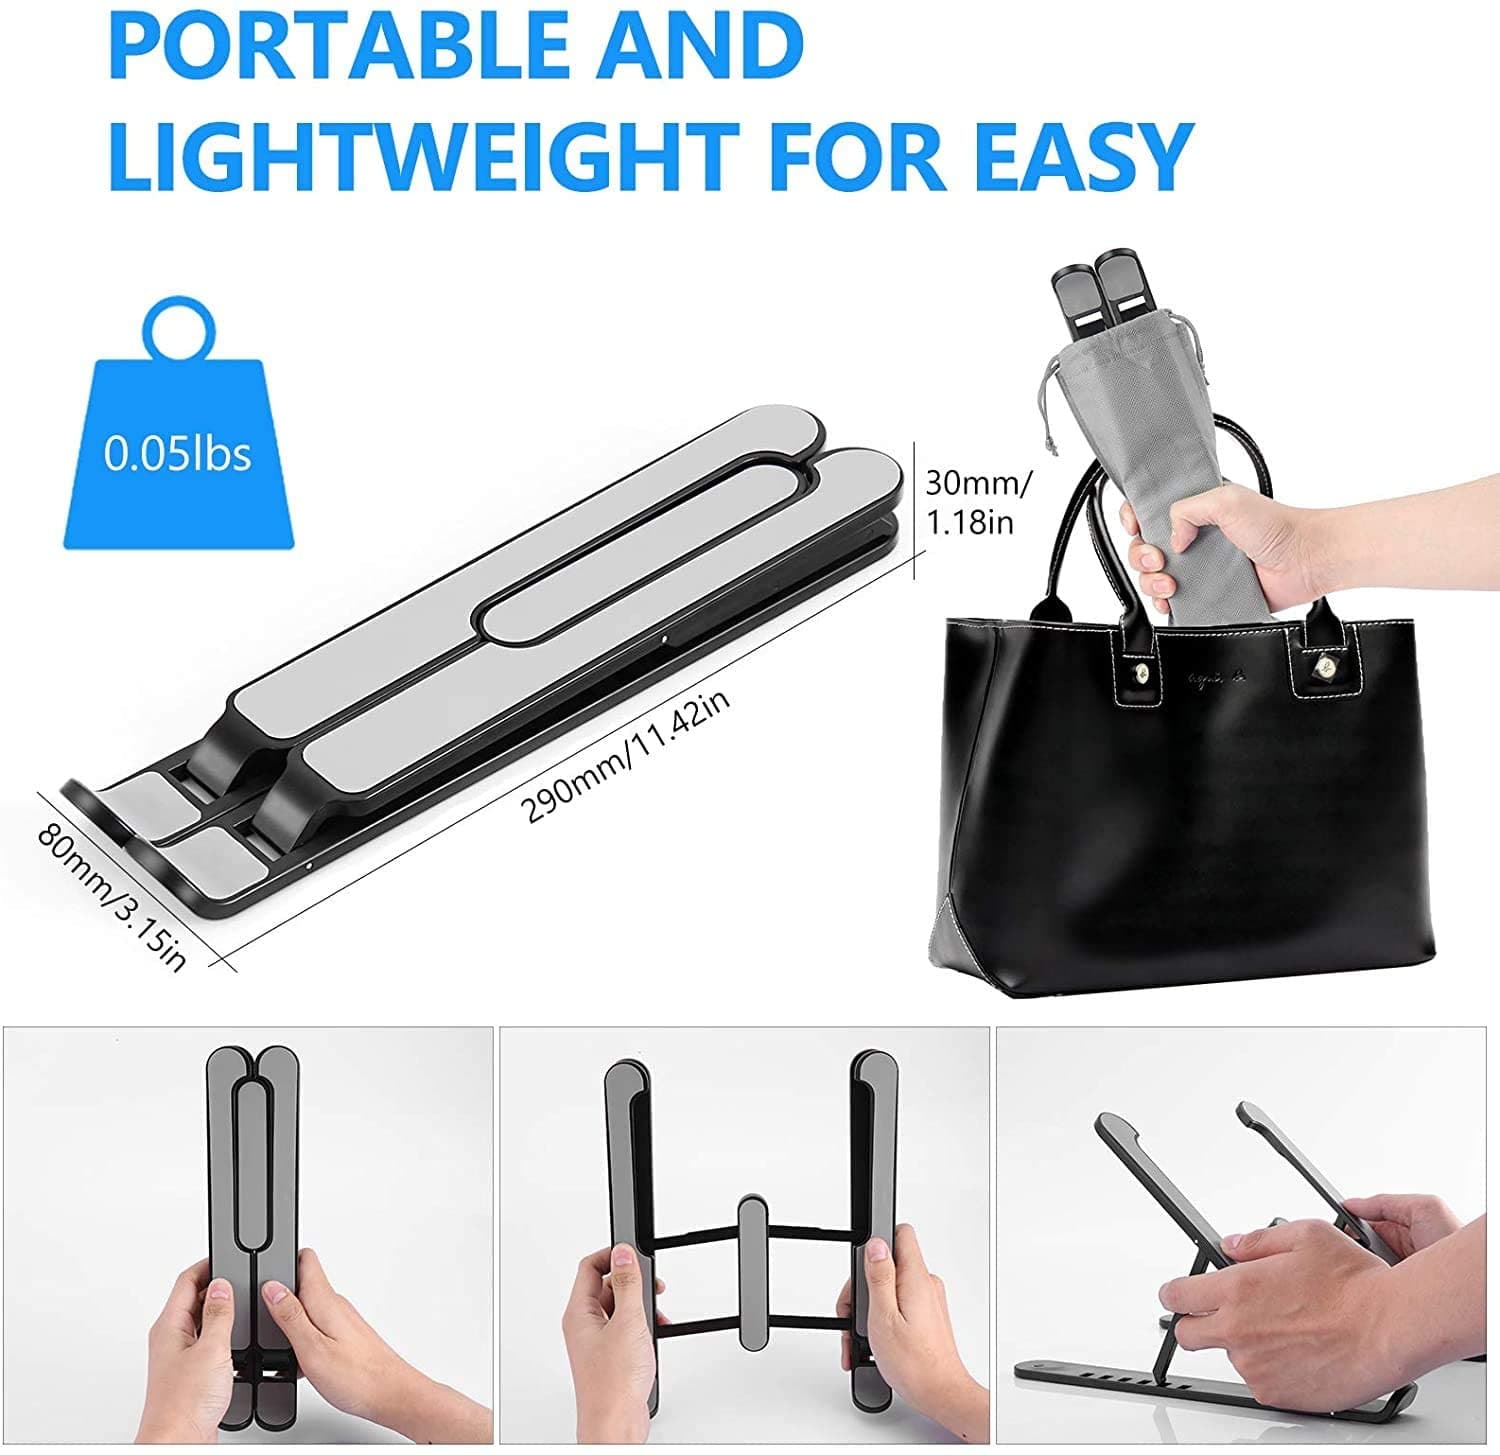 Angle Adjustable Height Portable Laptop Bracket Stand Laptop